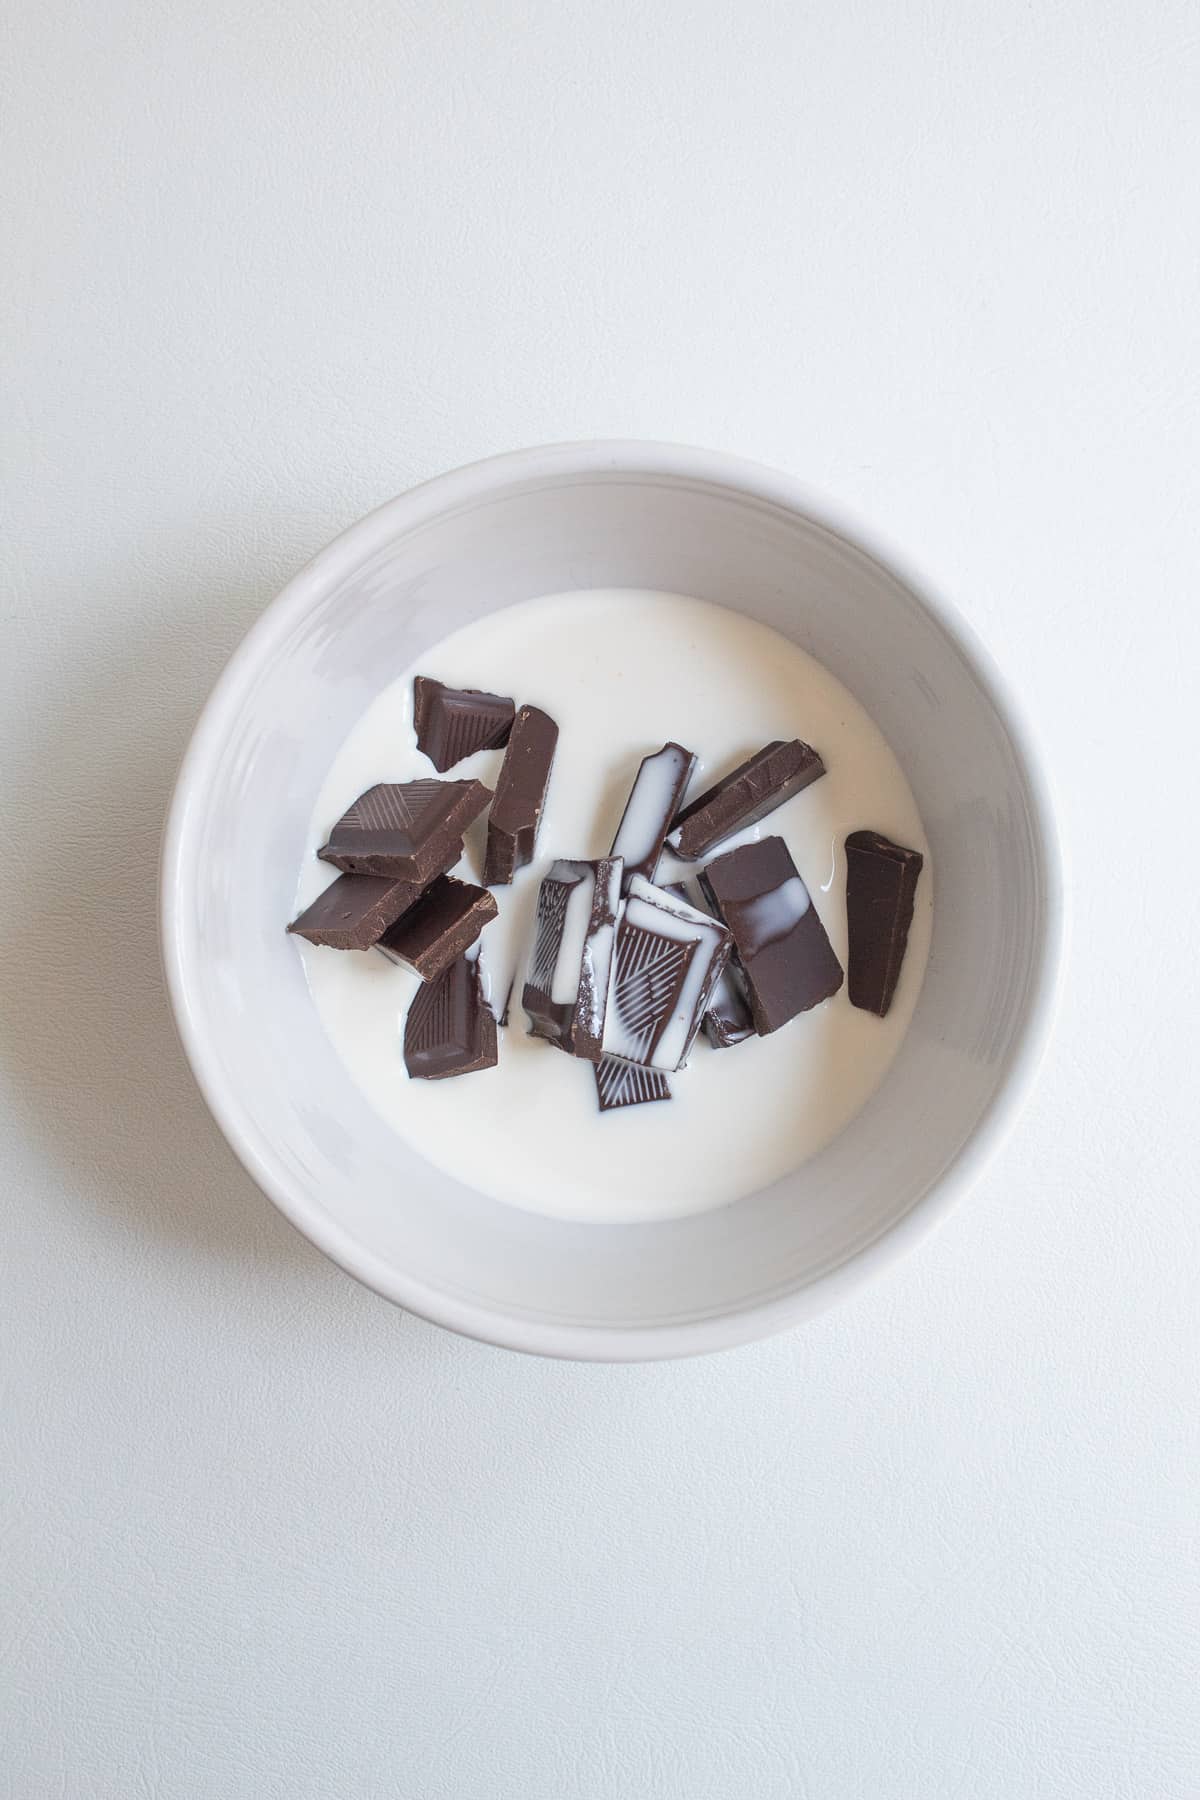 Cream and pieces of chocolate sit in the bottom of a small white bowl.